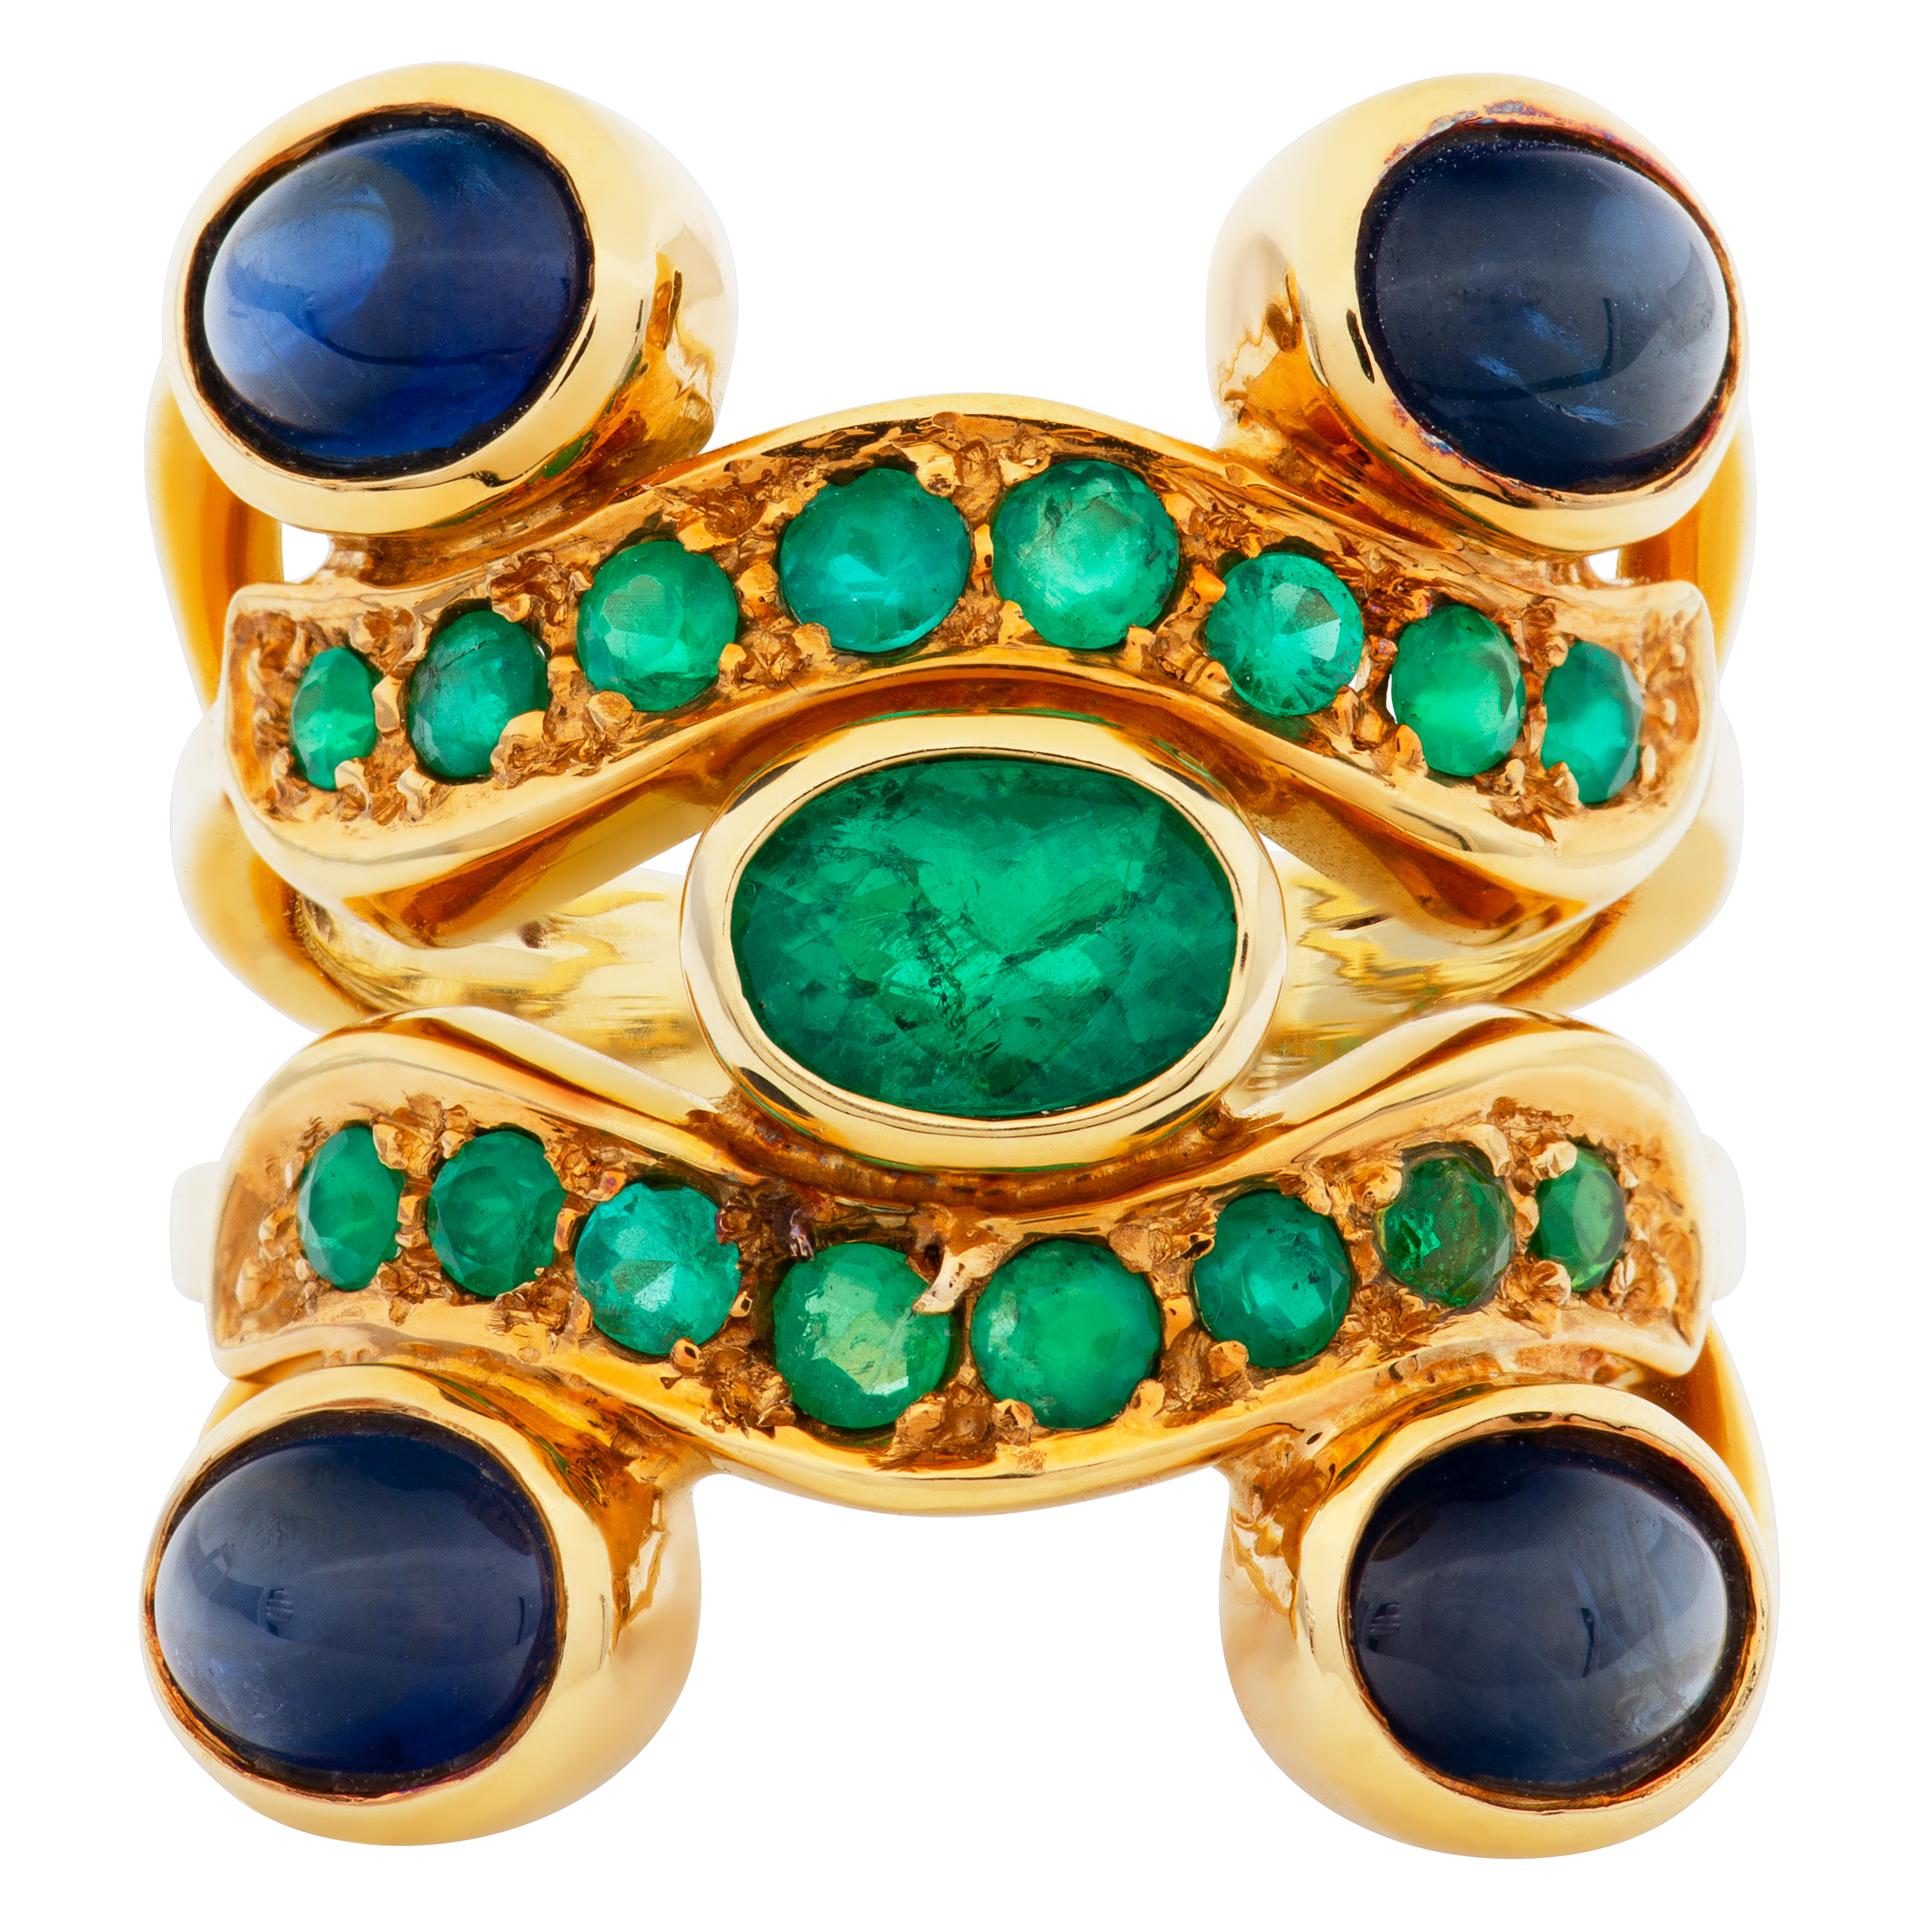 Brilliant oval and round cut Emeralds, cabochon sapphires ring set in 18k yellow gold. Center oval brilliant cut emerald  total approx. weight over 1.00 carat, 4 oval cabochon sapphires approx total weight over 4.00, 16 round  brilliant cut emerald,